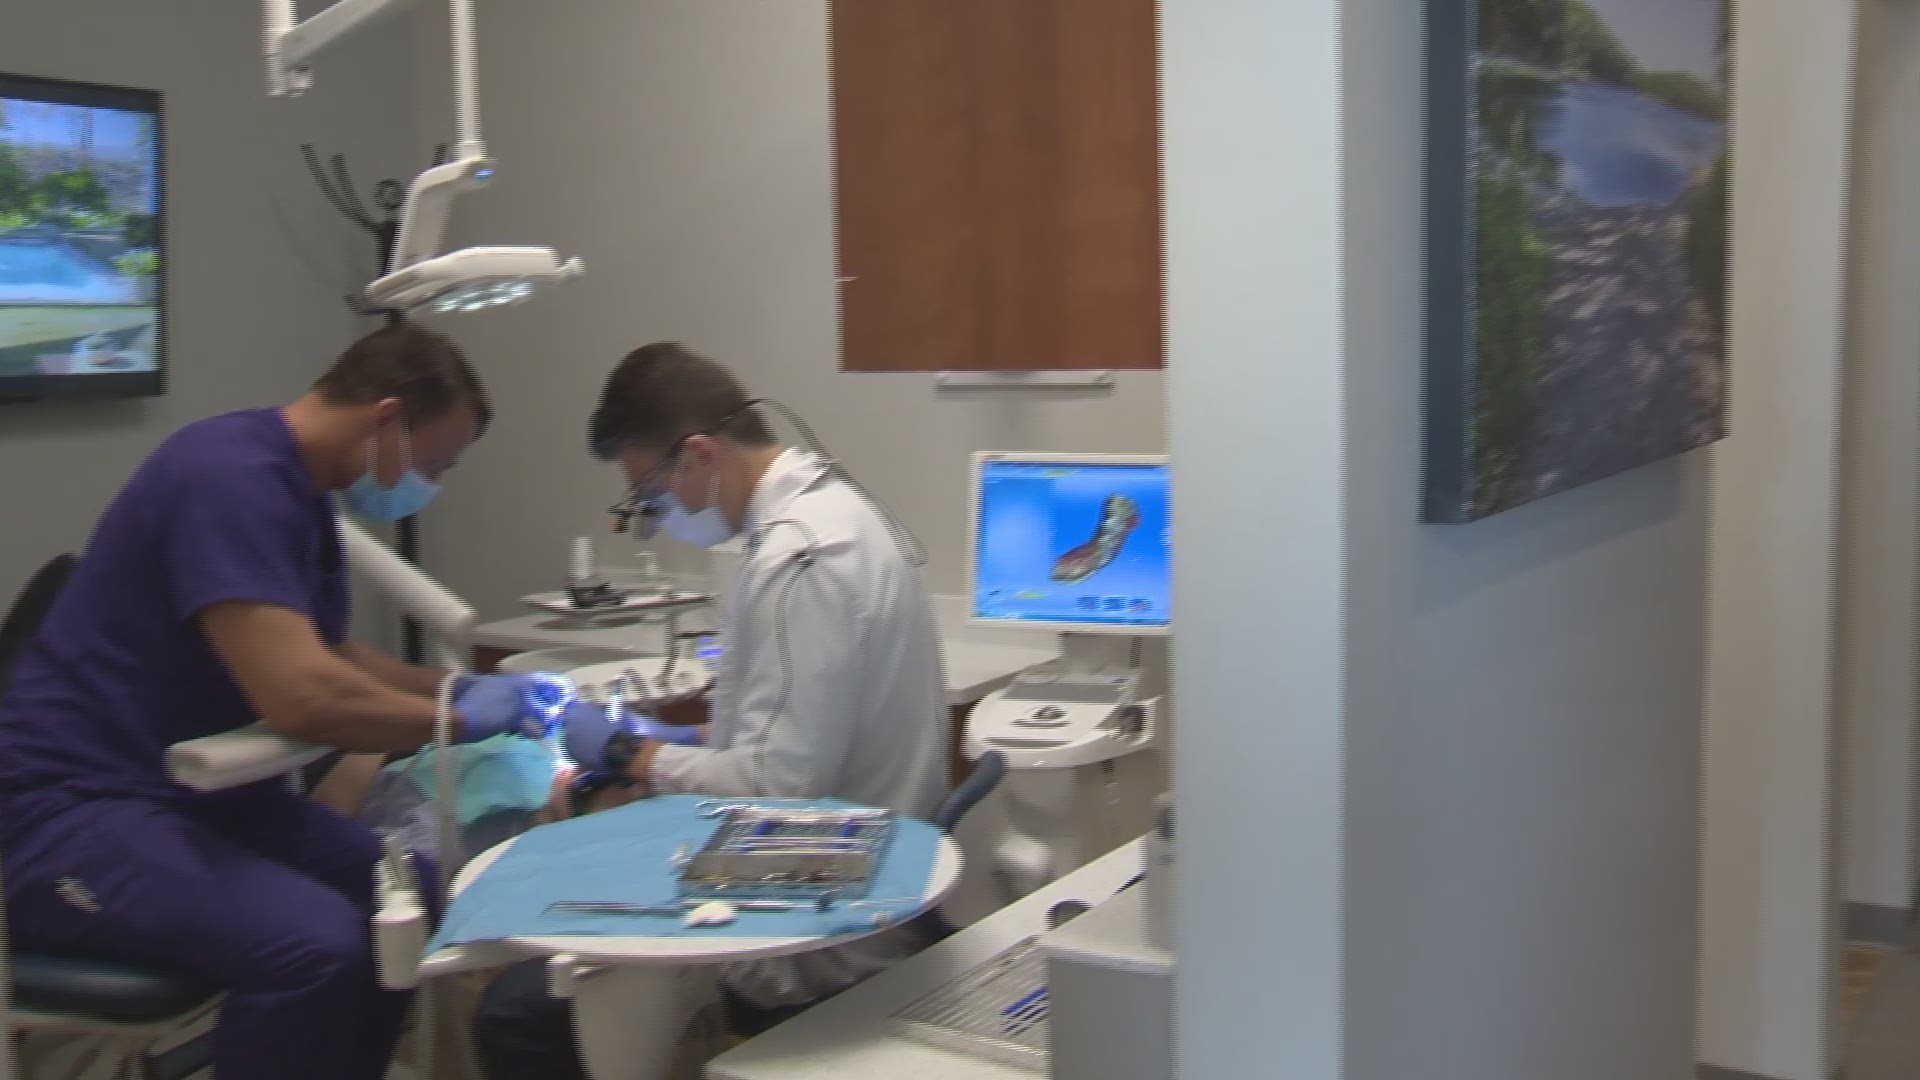 A Cedar Park dentist is using new technology to speed up the process for some of his patients' procedures.